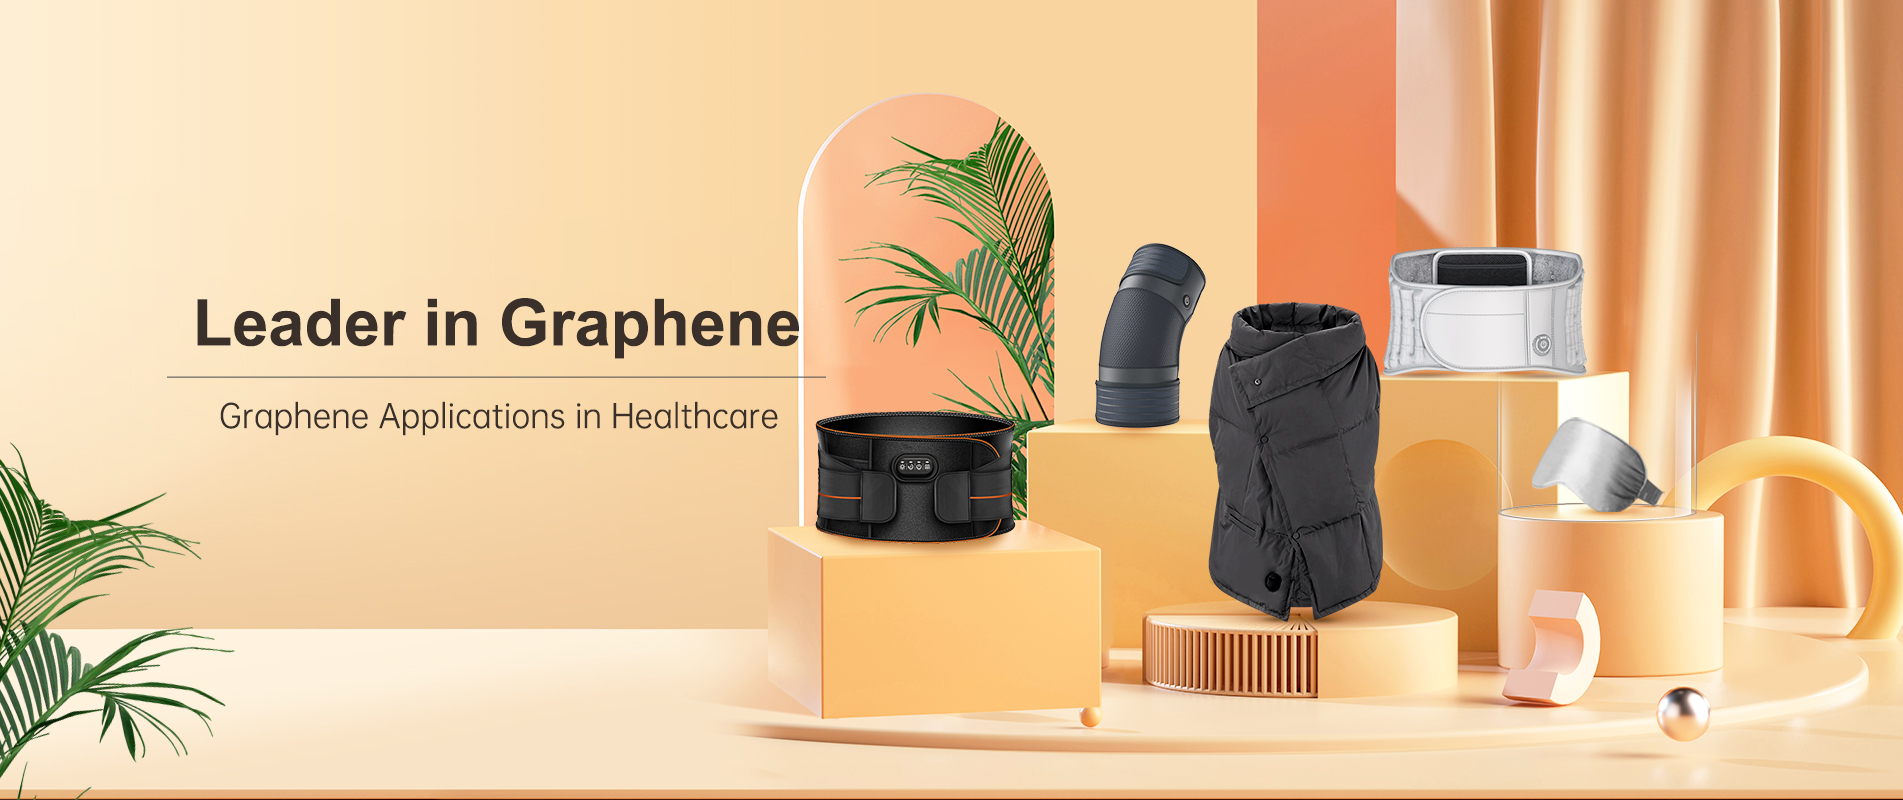 Graphene Applications in Healthcare